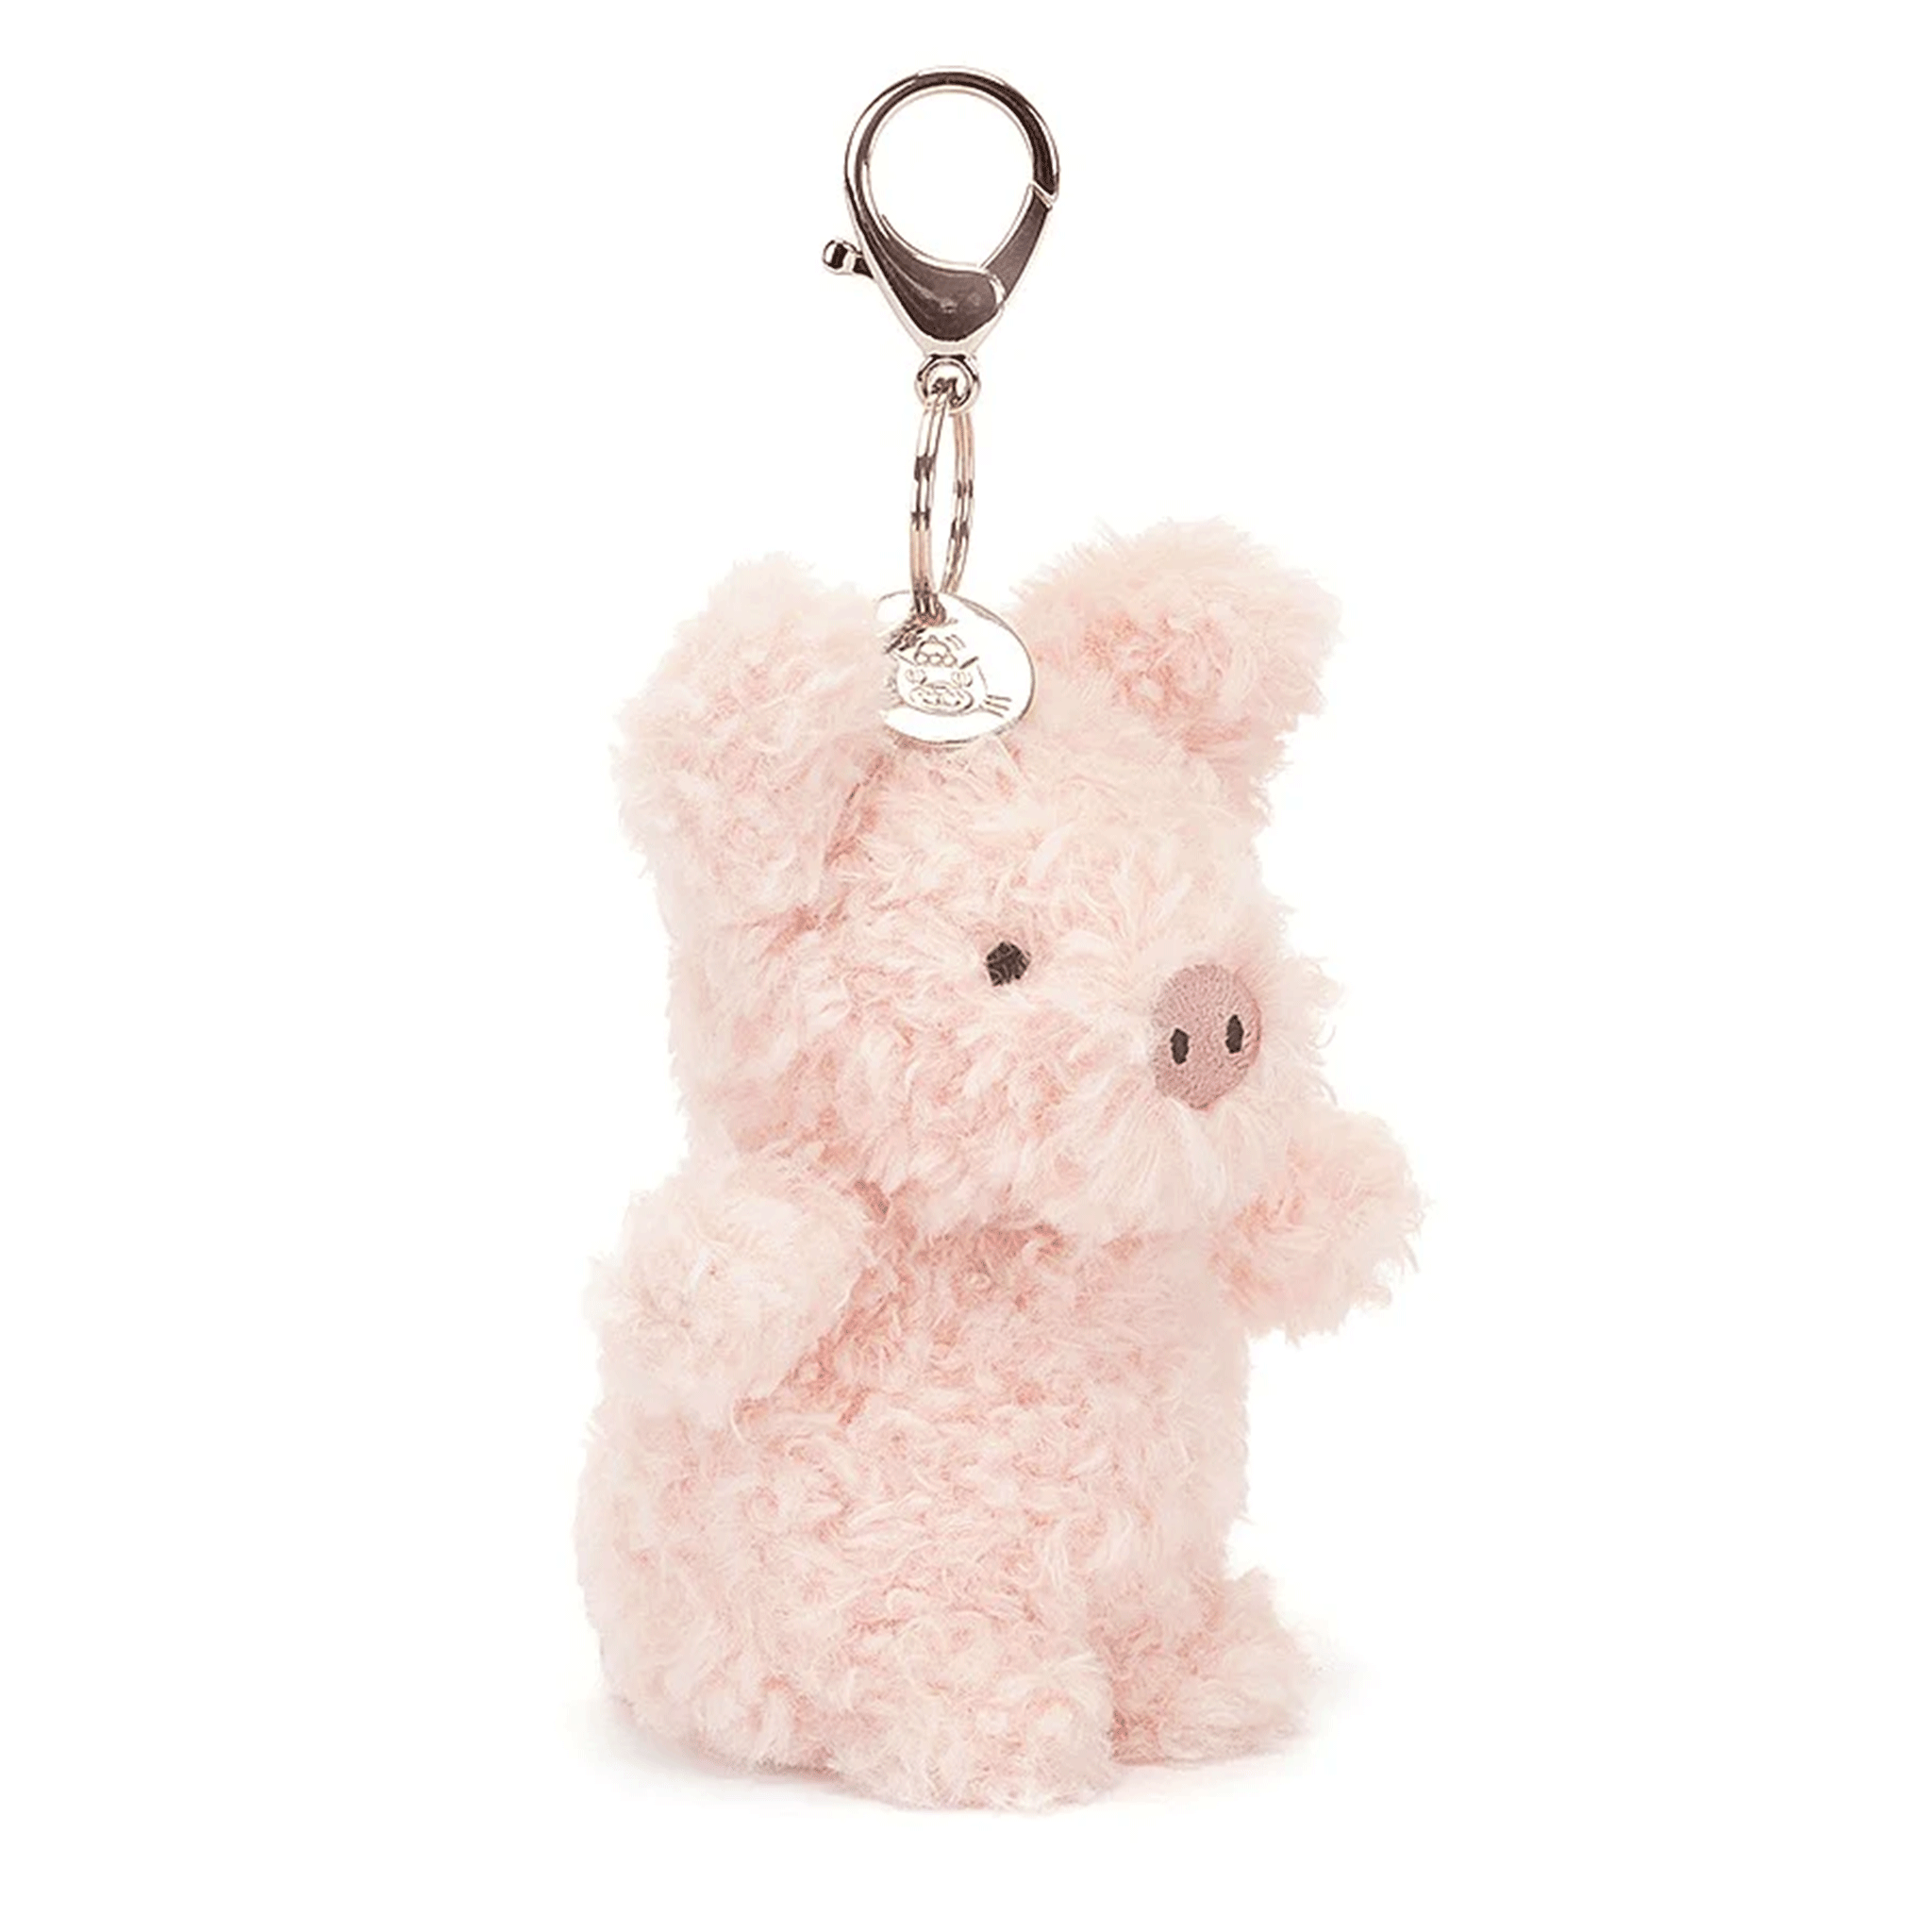 On a pink background is a pink pig bag charm with a silver clasp for attaching. 